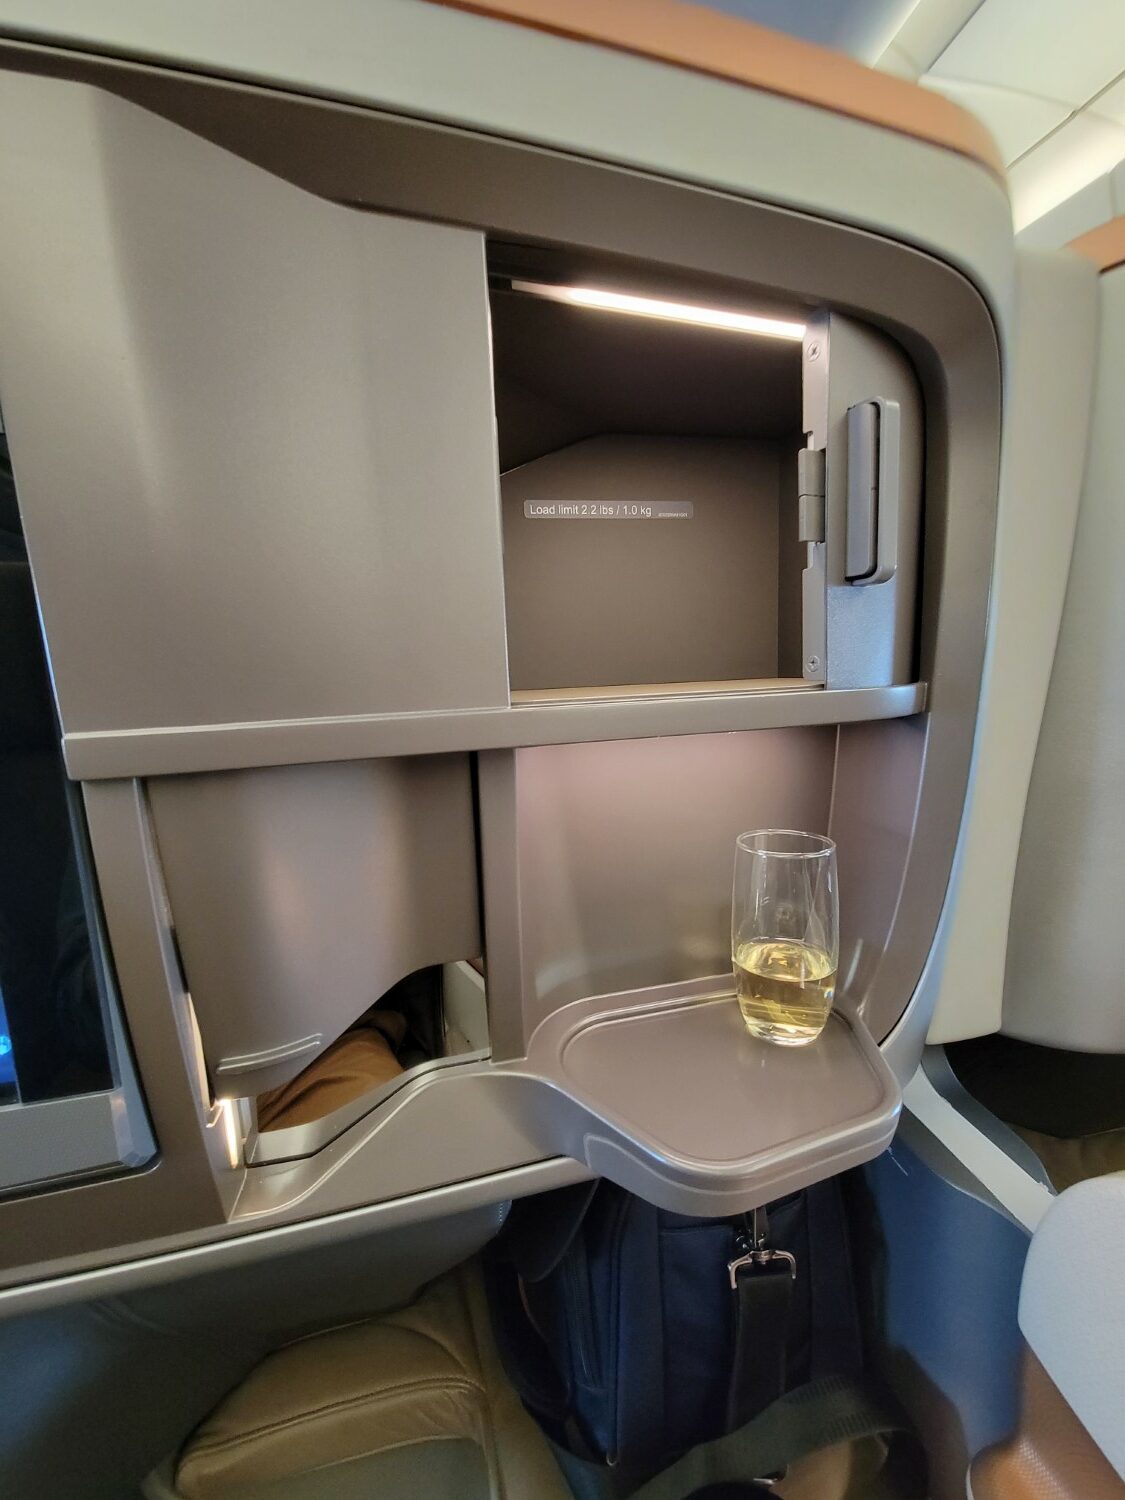 singapore airlines business class a350 storage compartments